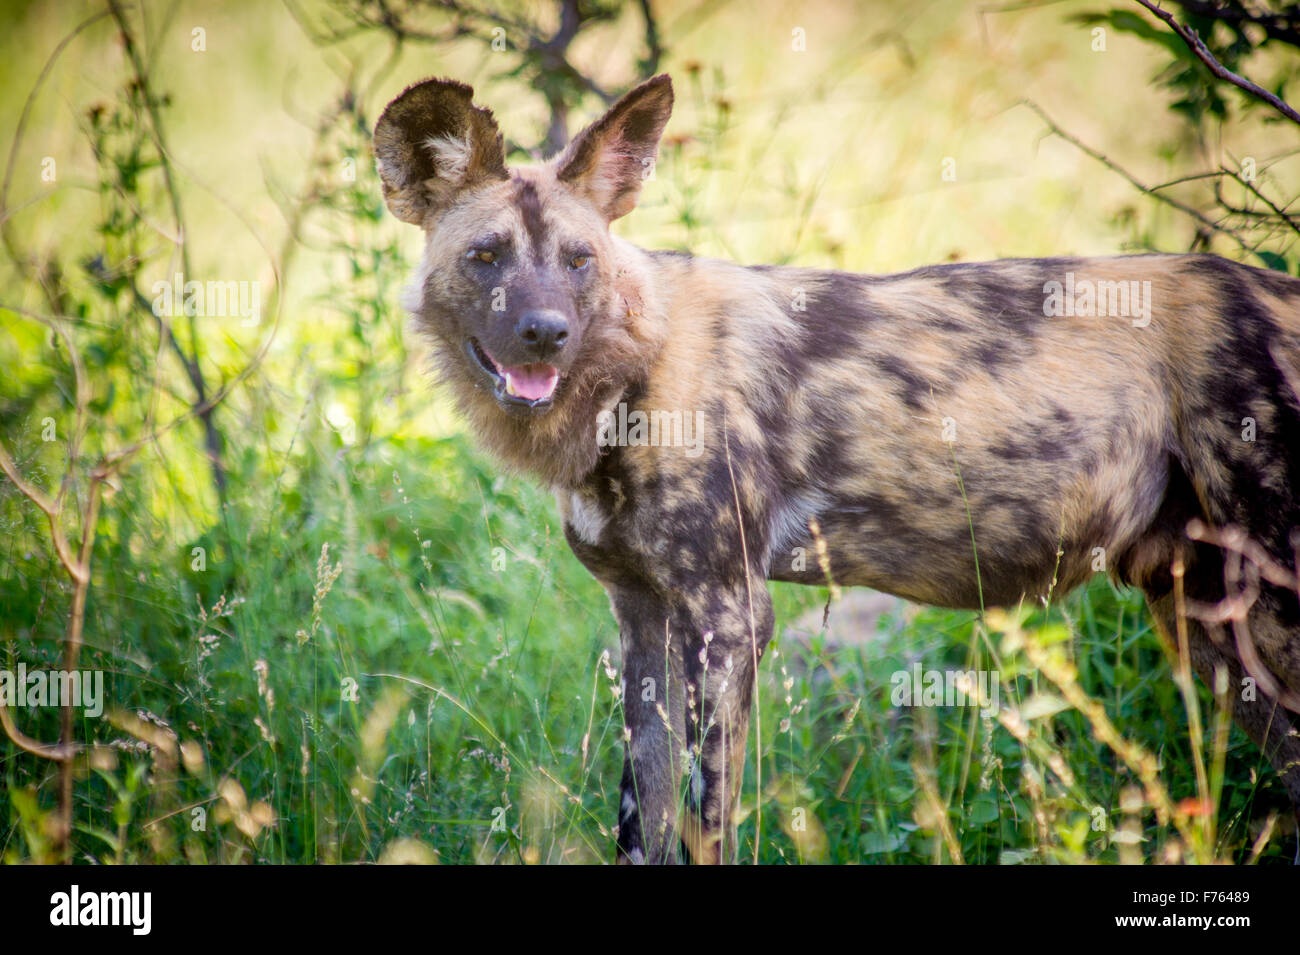 Sud Africa - Parco Nazionale Kruger African Wild Dog (Lycaon pictus) Foto Stock